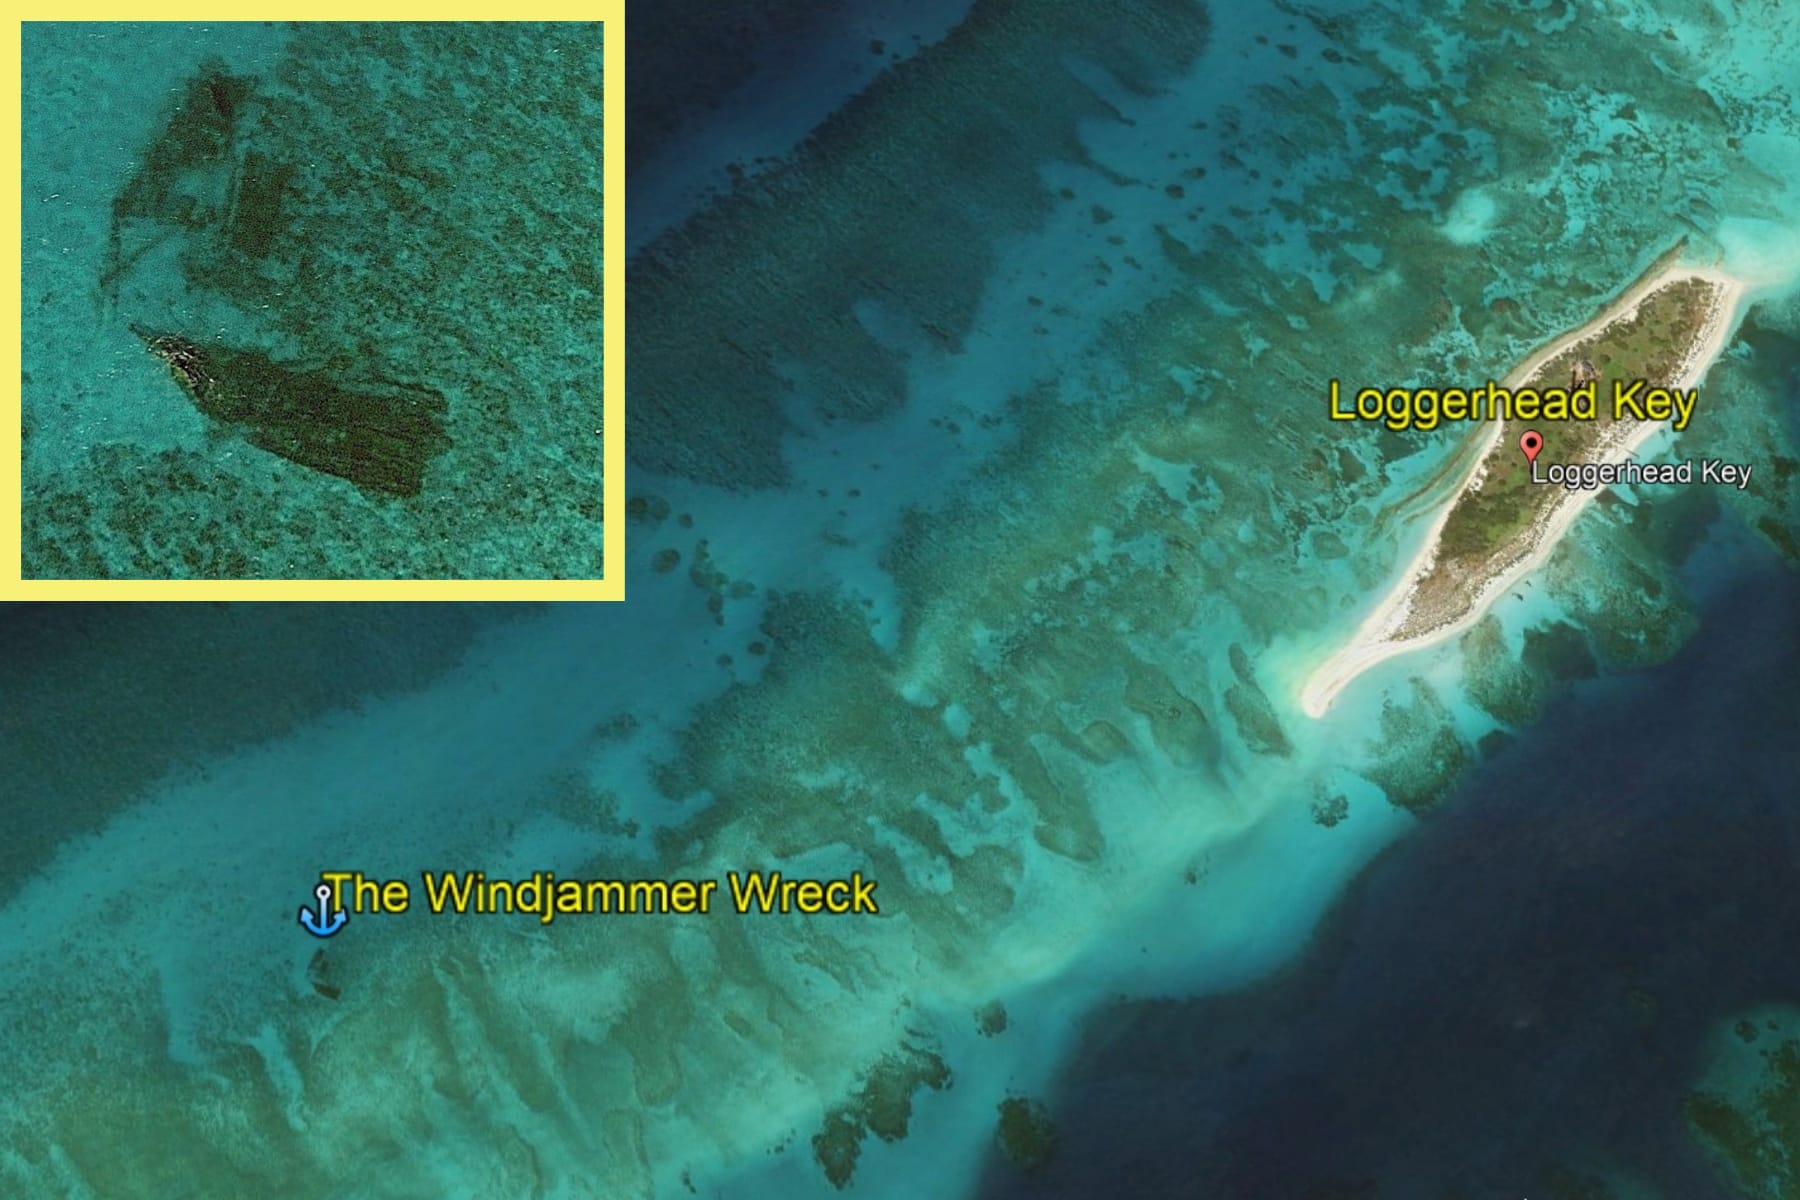 Map showing the location of the Windjammer Shipwreck southwest of Loggerhead Key.